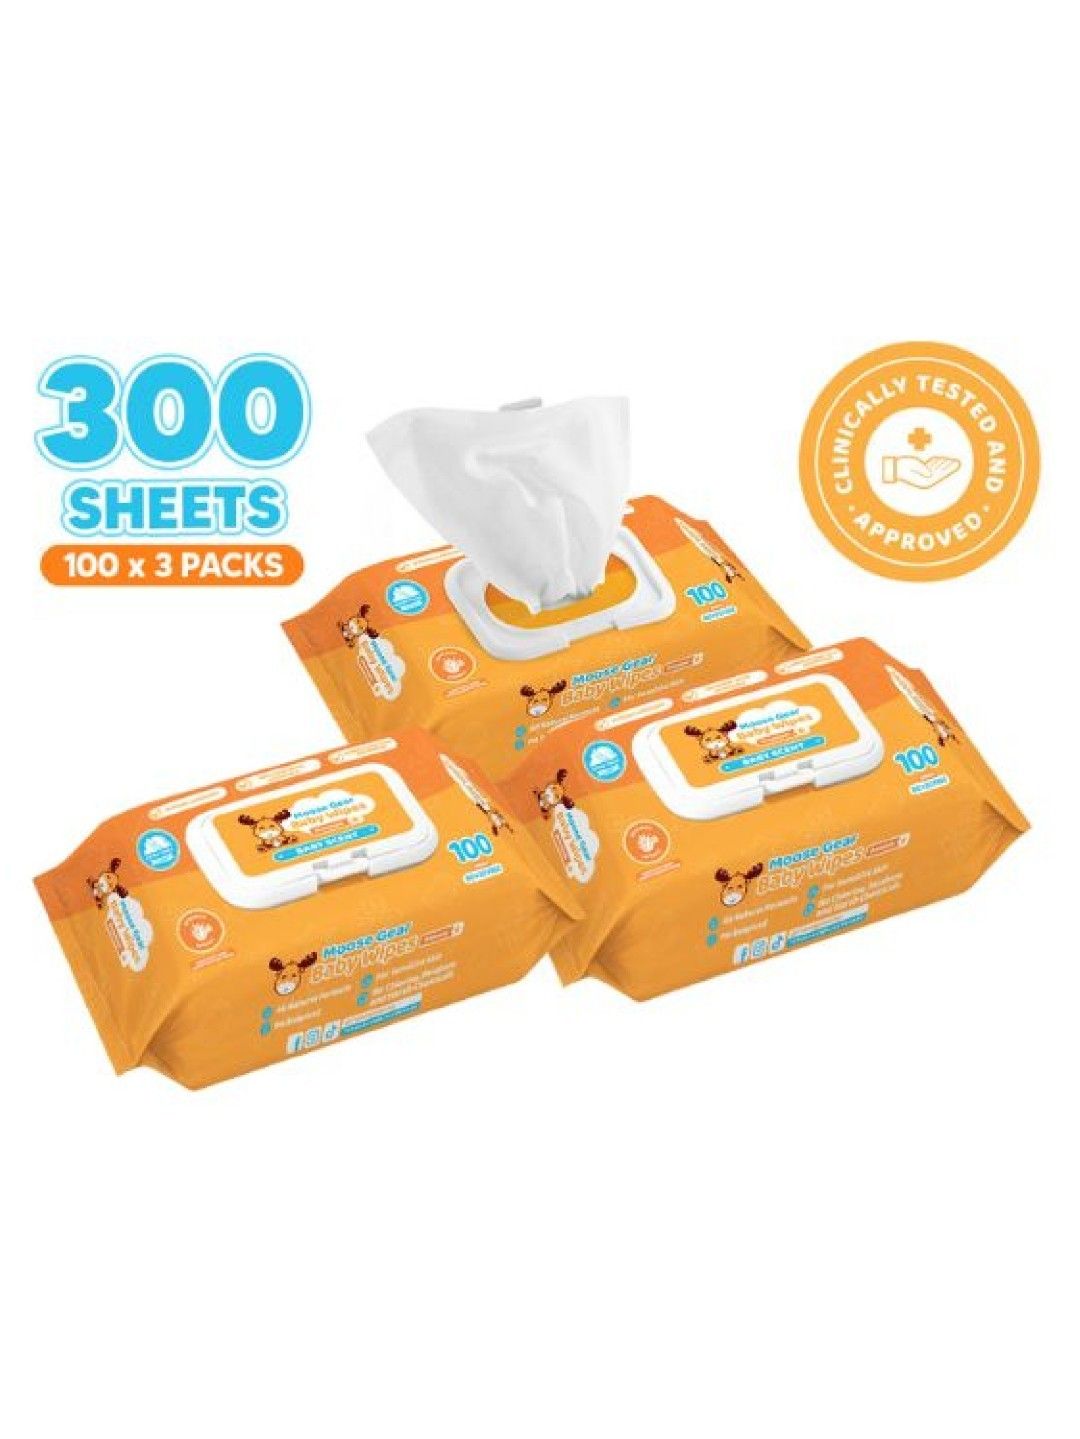 Moose Gear Baby Wipes Baby Scent (100s x 3 Packs) (No Color- Image 1)